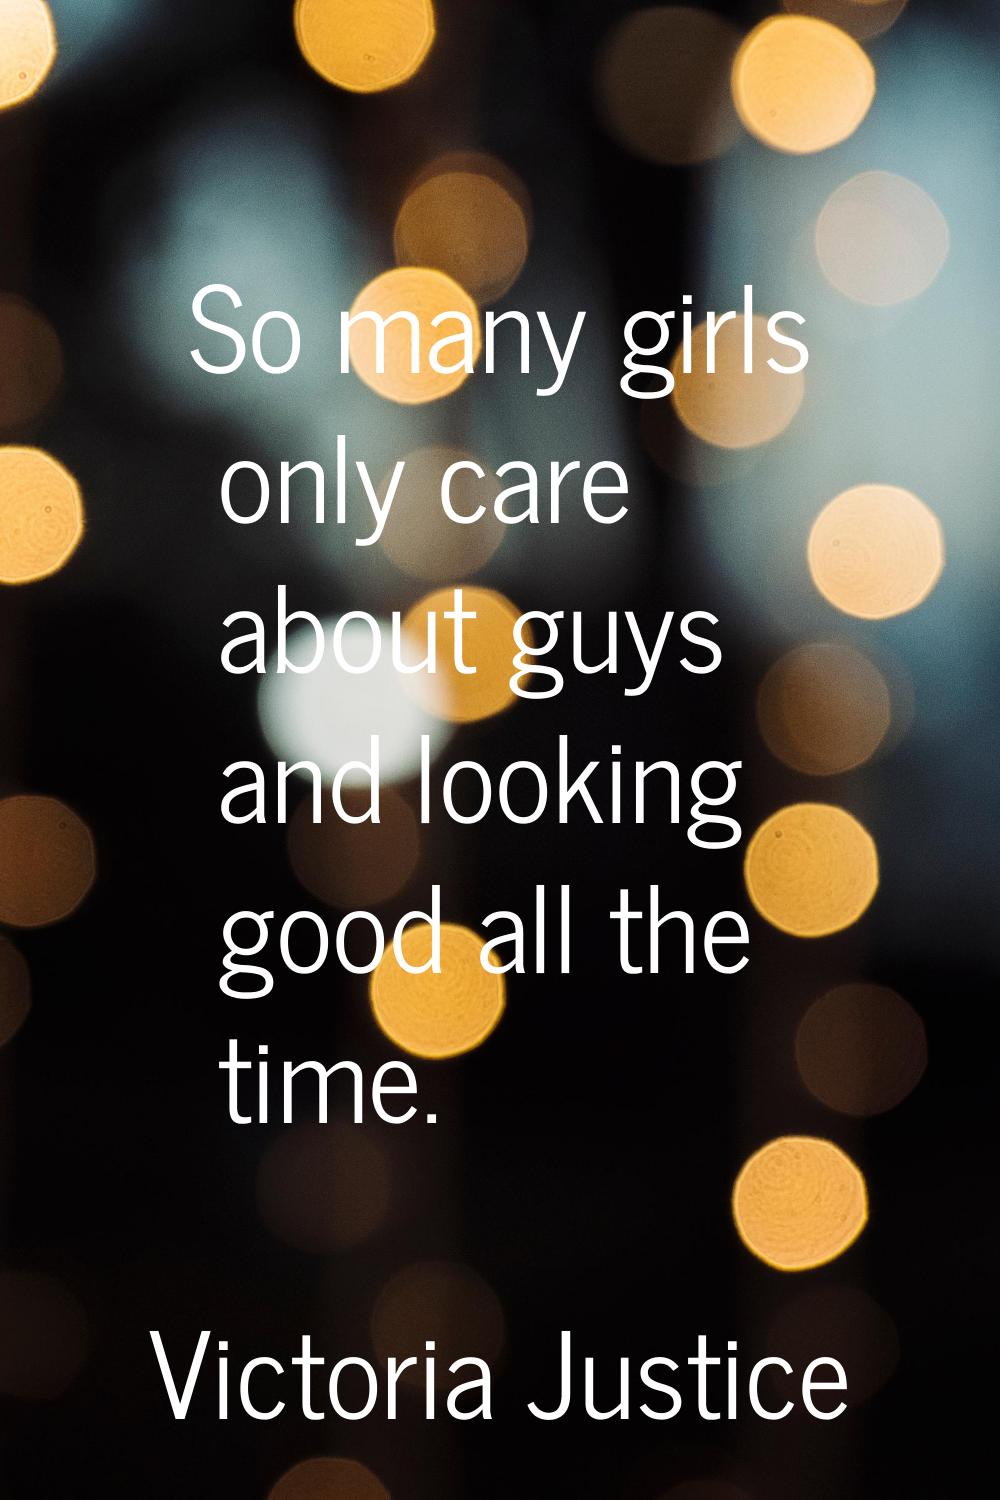 So many girls only care about guys and looking good all the time.